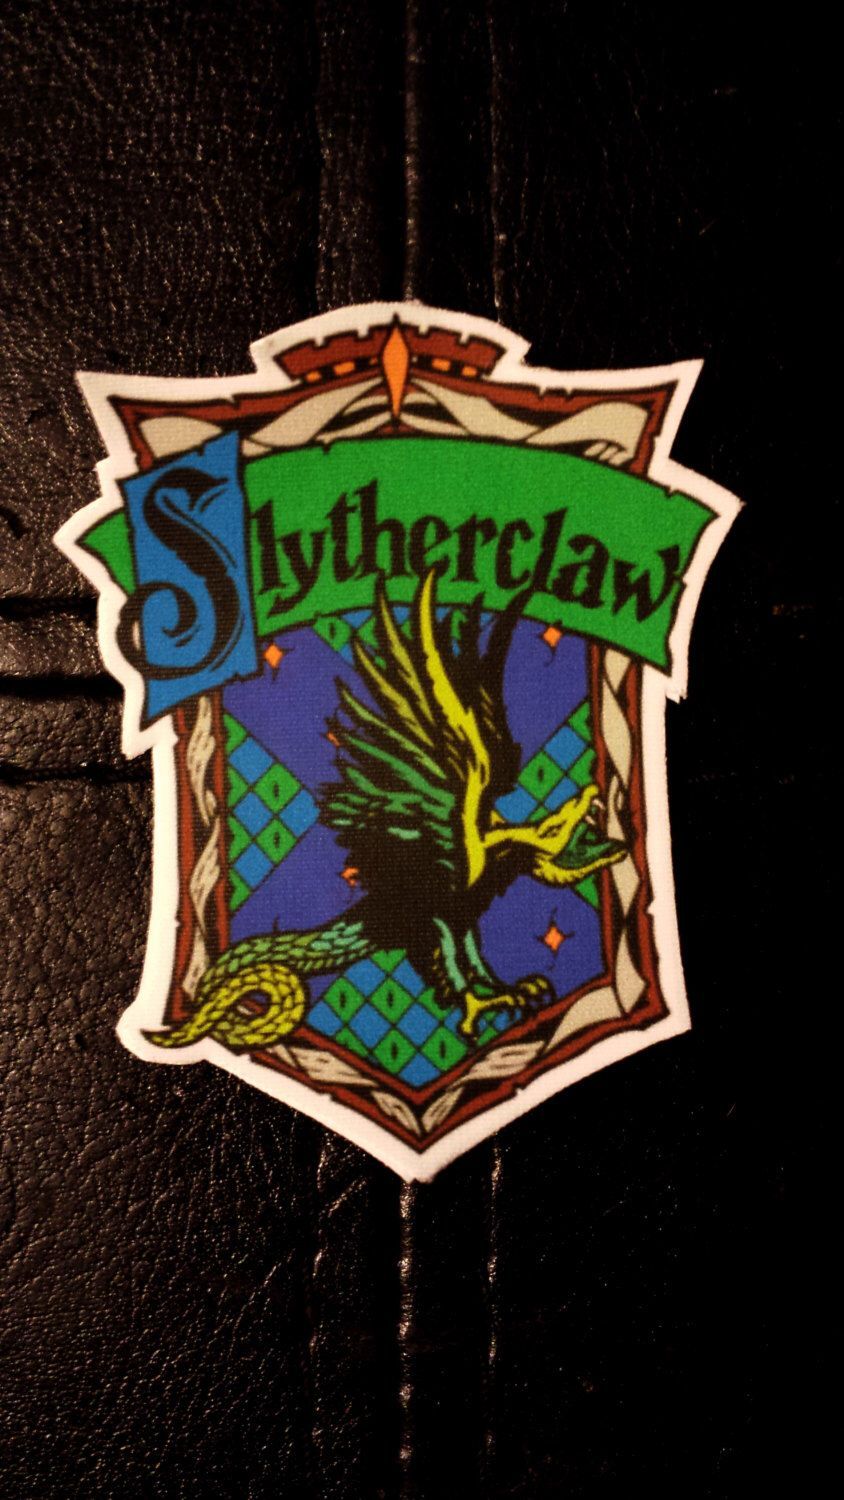 Slytherpuff Wallpapers